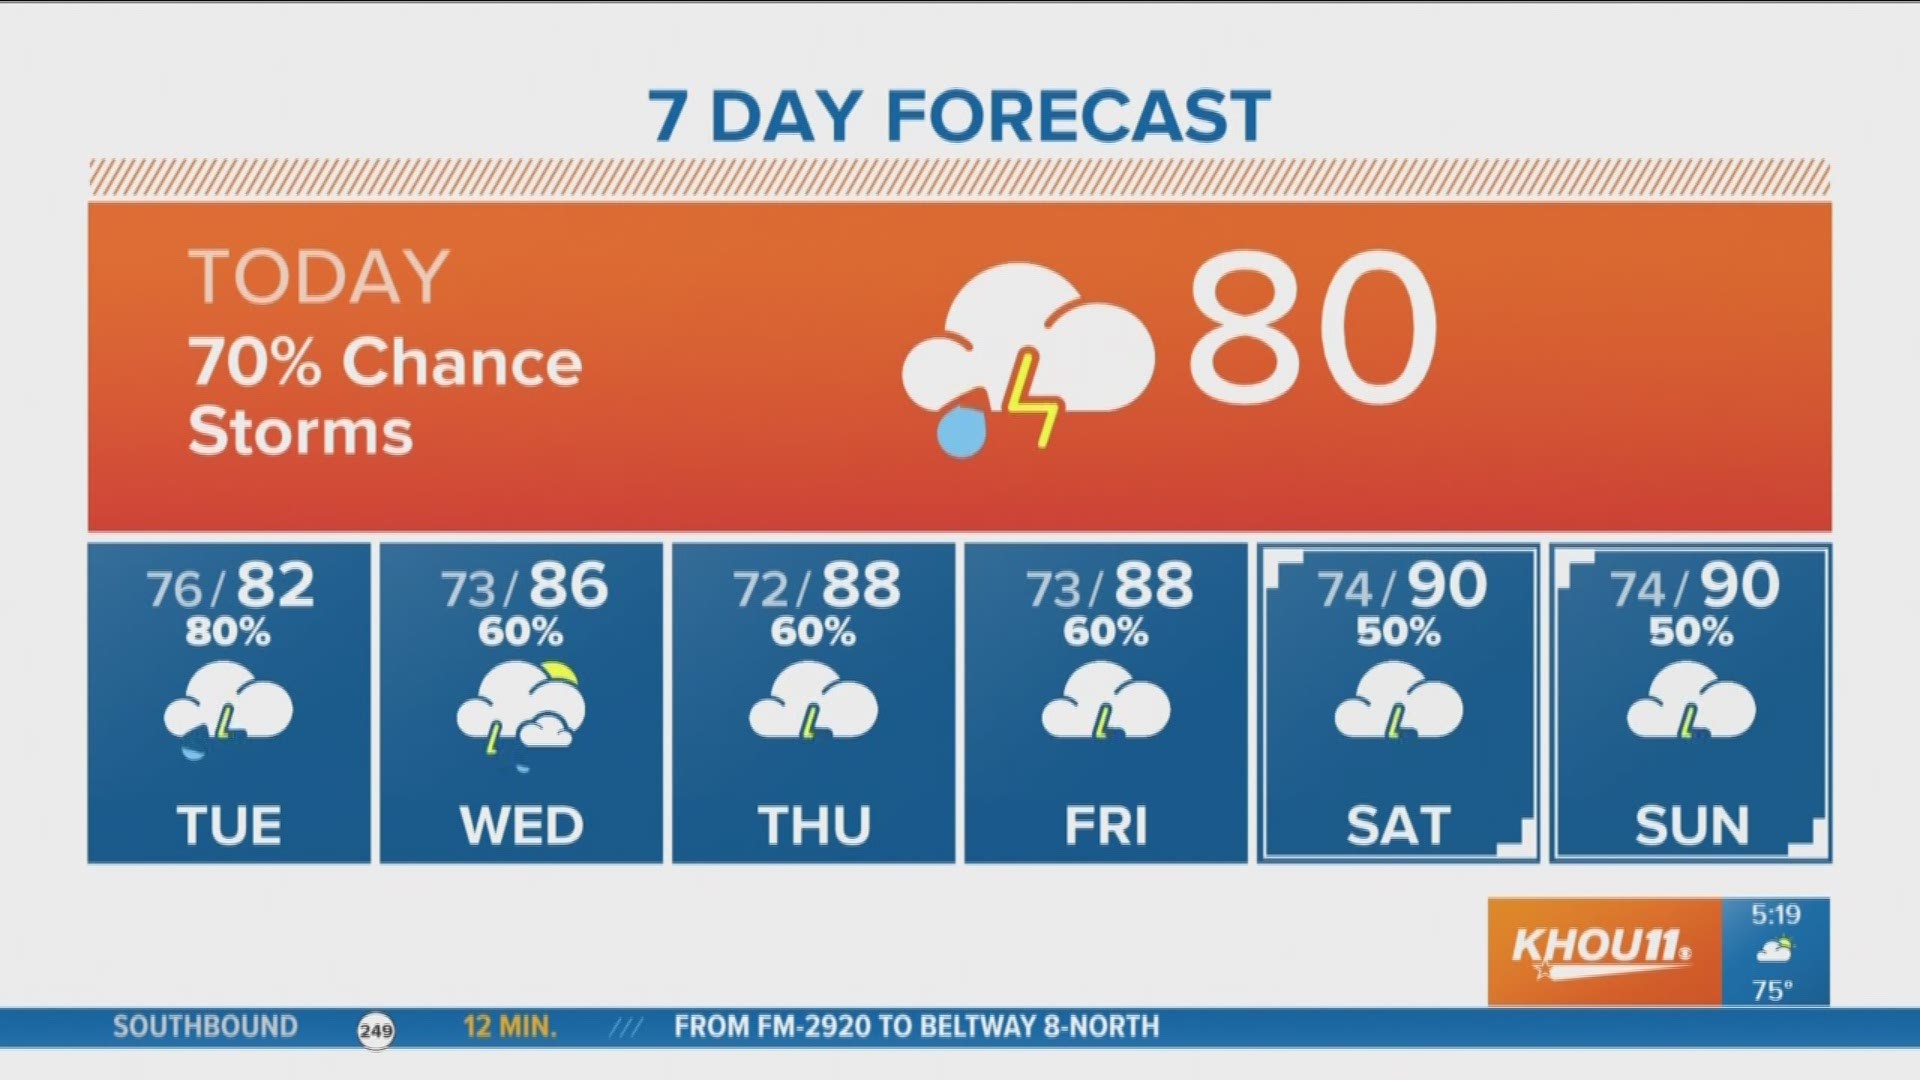 KHOU 11 Meteorologist Chita Craft says there is a Flash Flood Watch in effect for most of Southeast Texas throughout Monday heading into Tuesday.